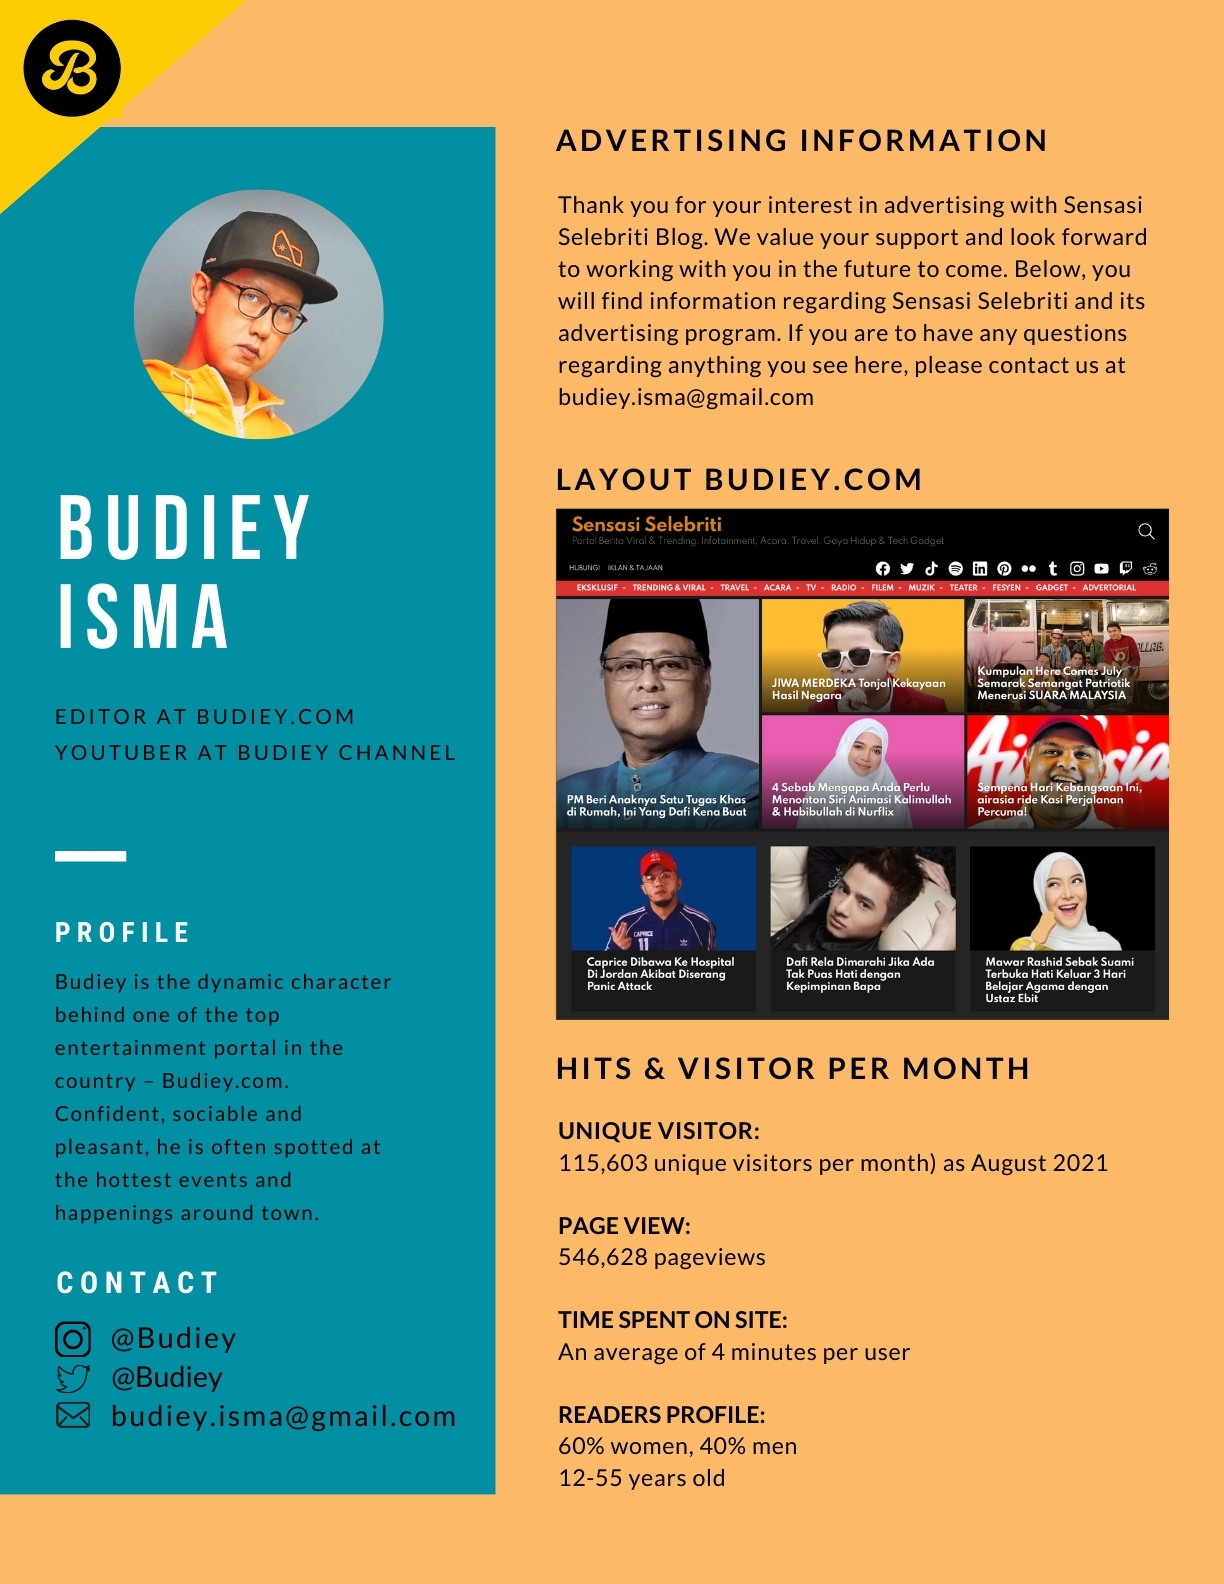 RATE CARD & PROFILE BUDIEY